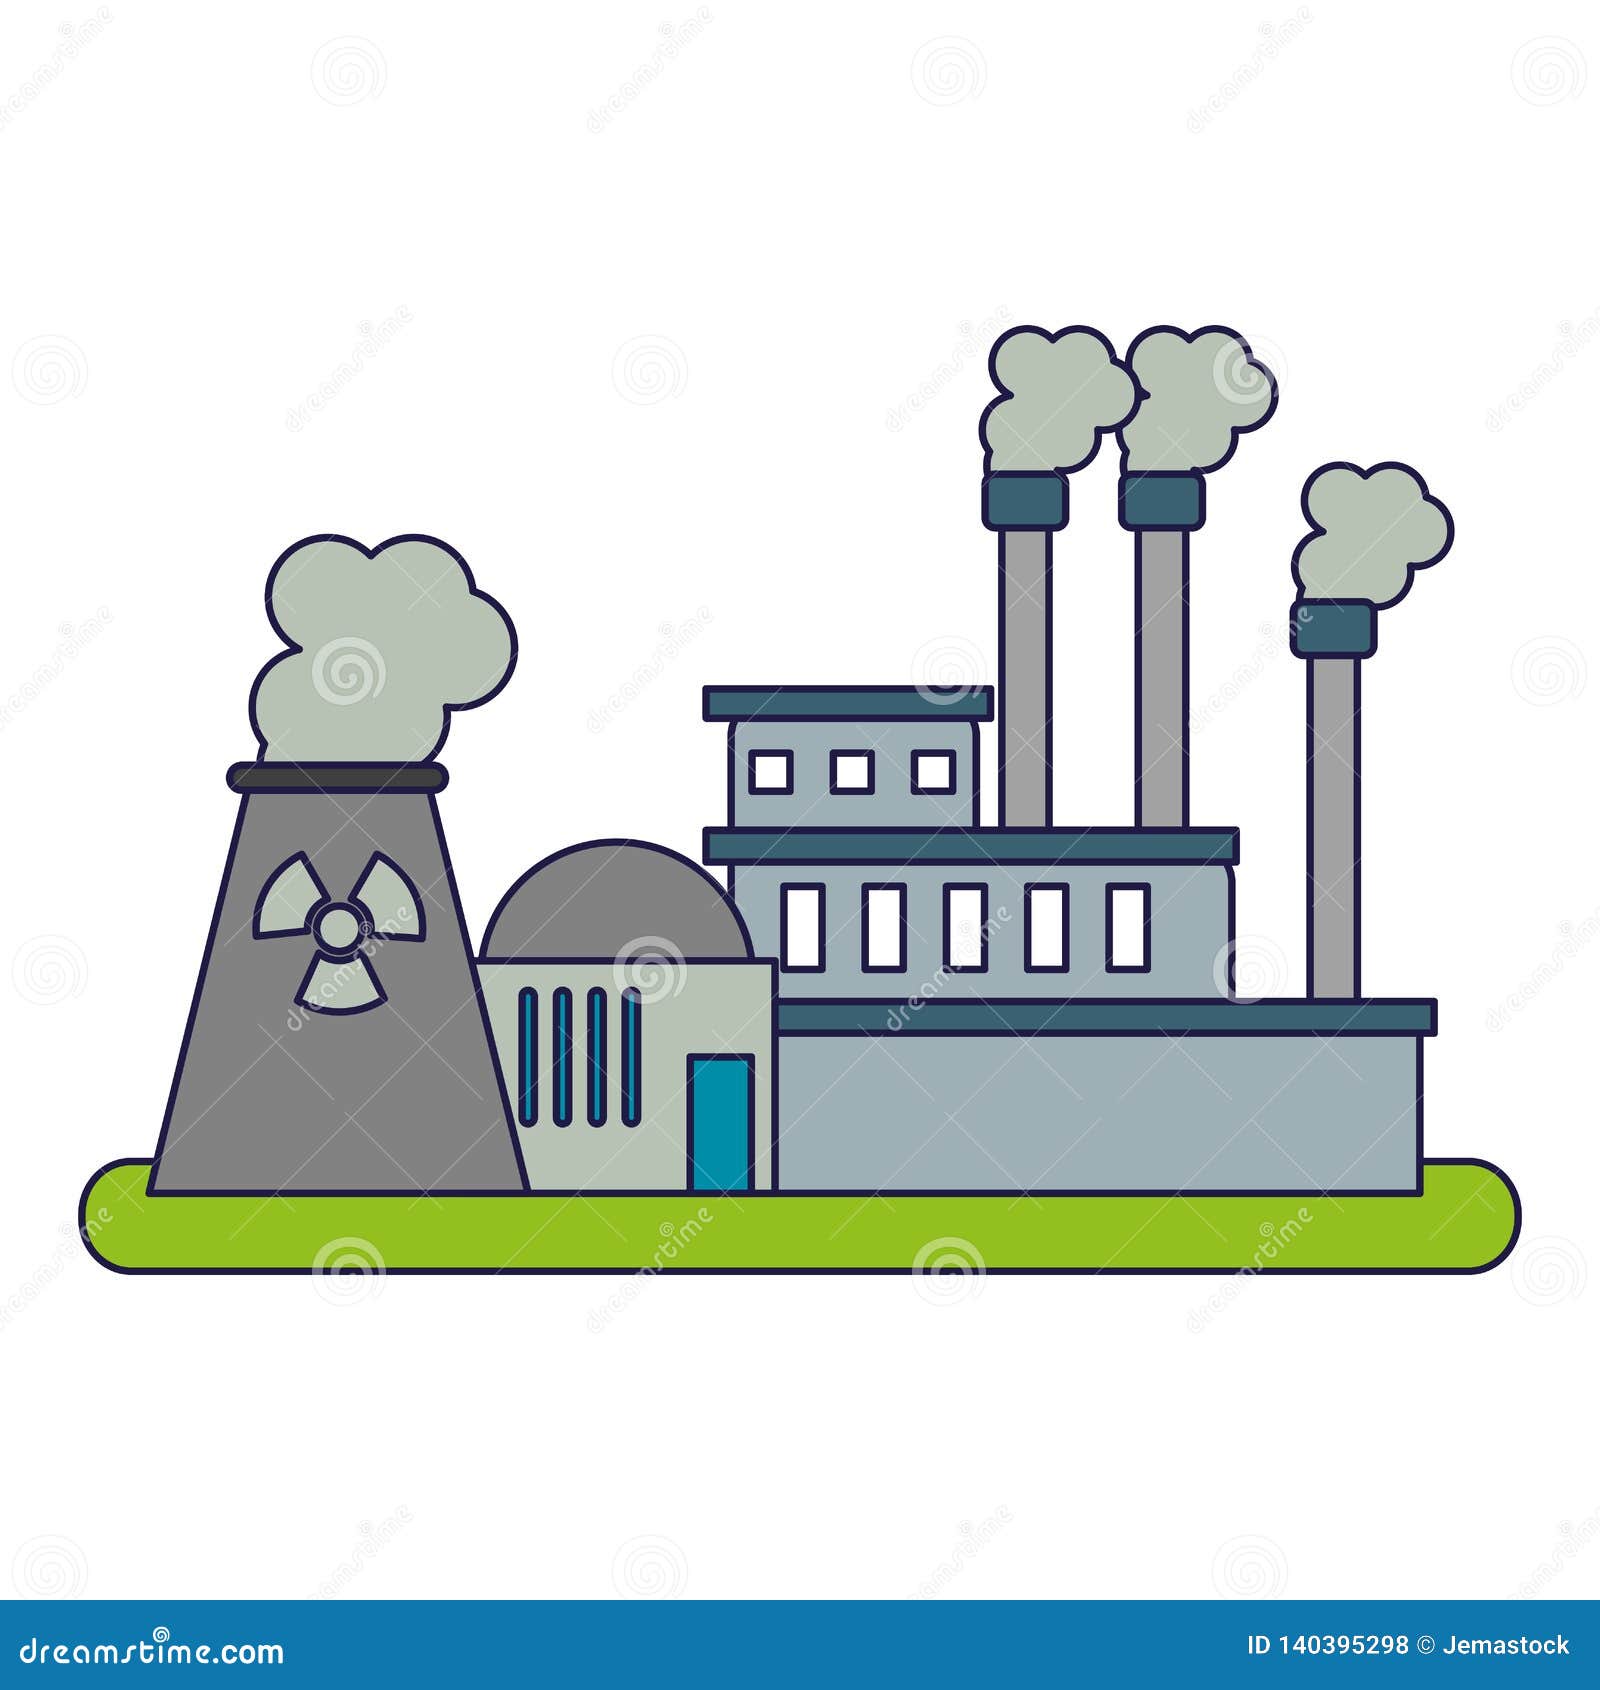 Nuclear industrial plant stock vector. Illustration of pollution ...